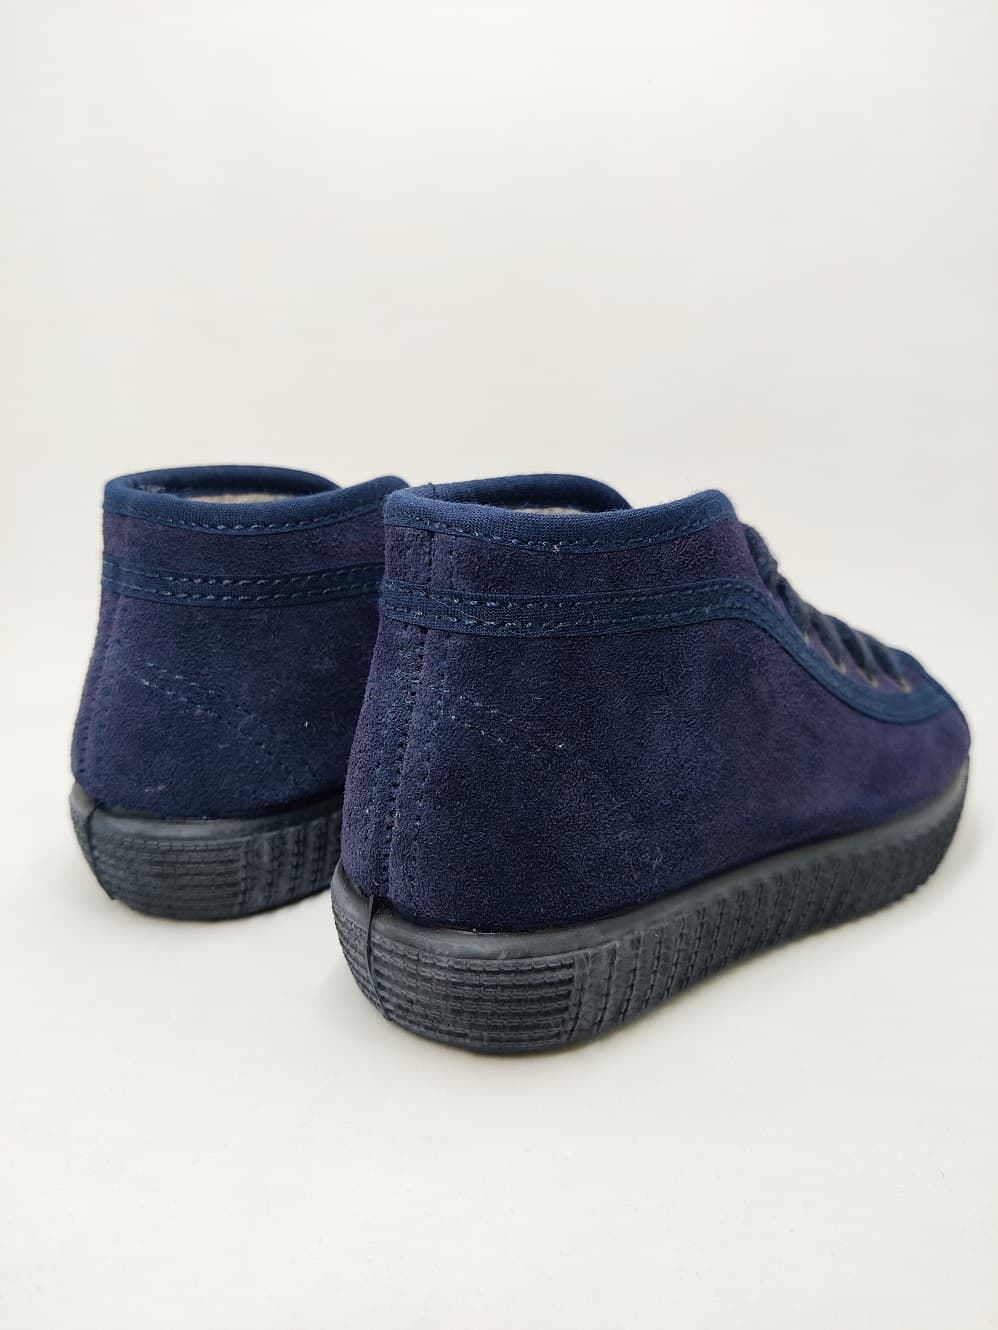 La Cadena Booty for children Navy Blue with laces - Image 3